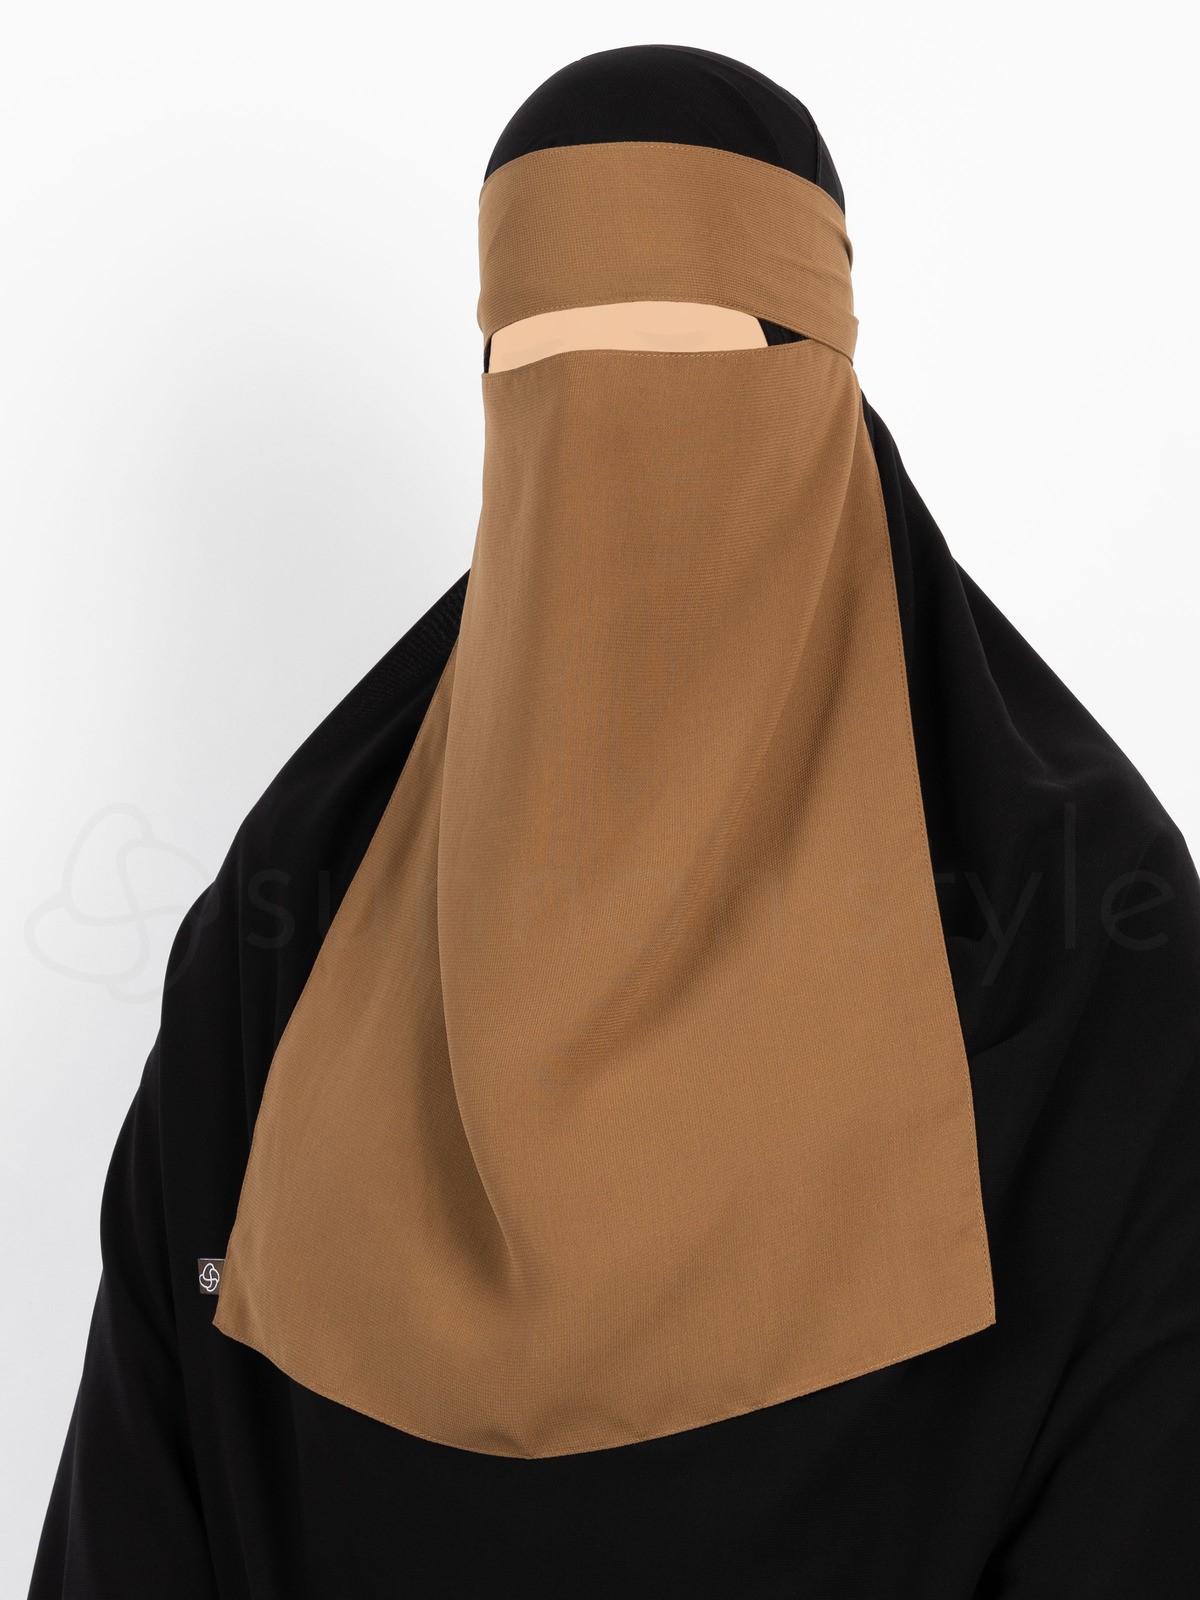 Sunnah Style - Pull-Down One Layer Niqab (Autumn)